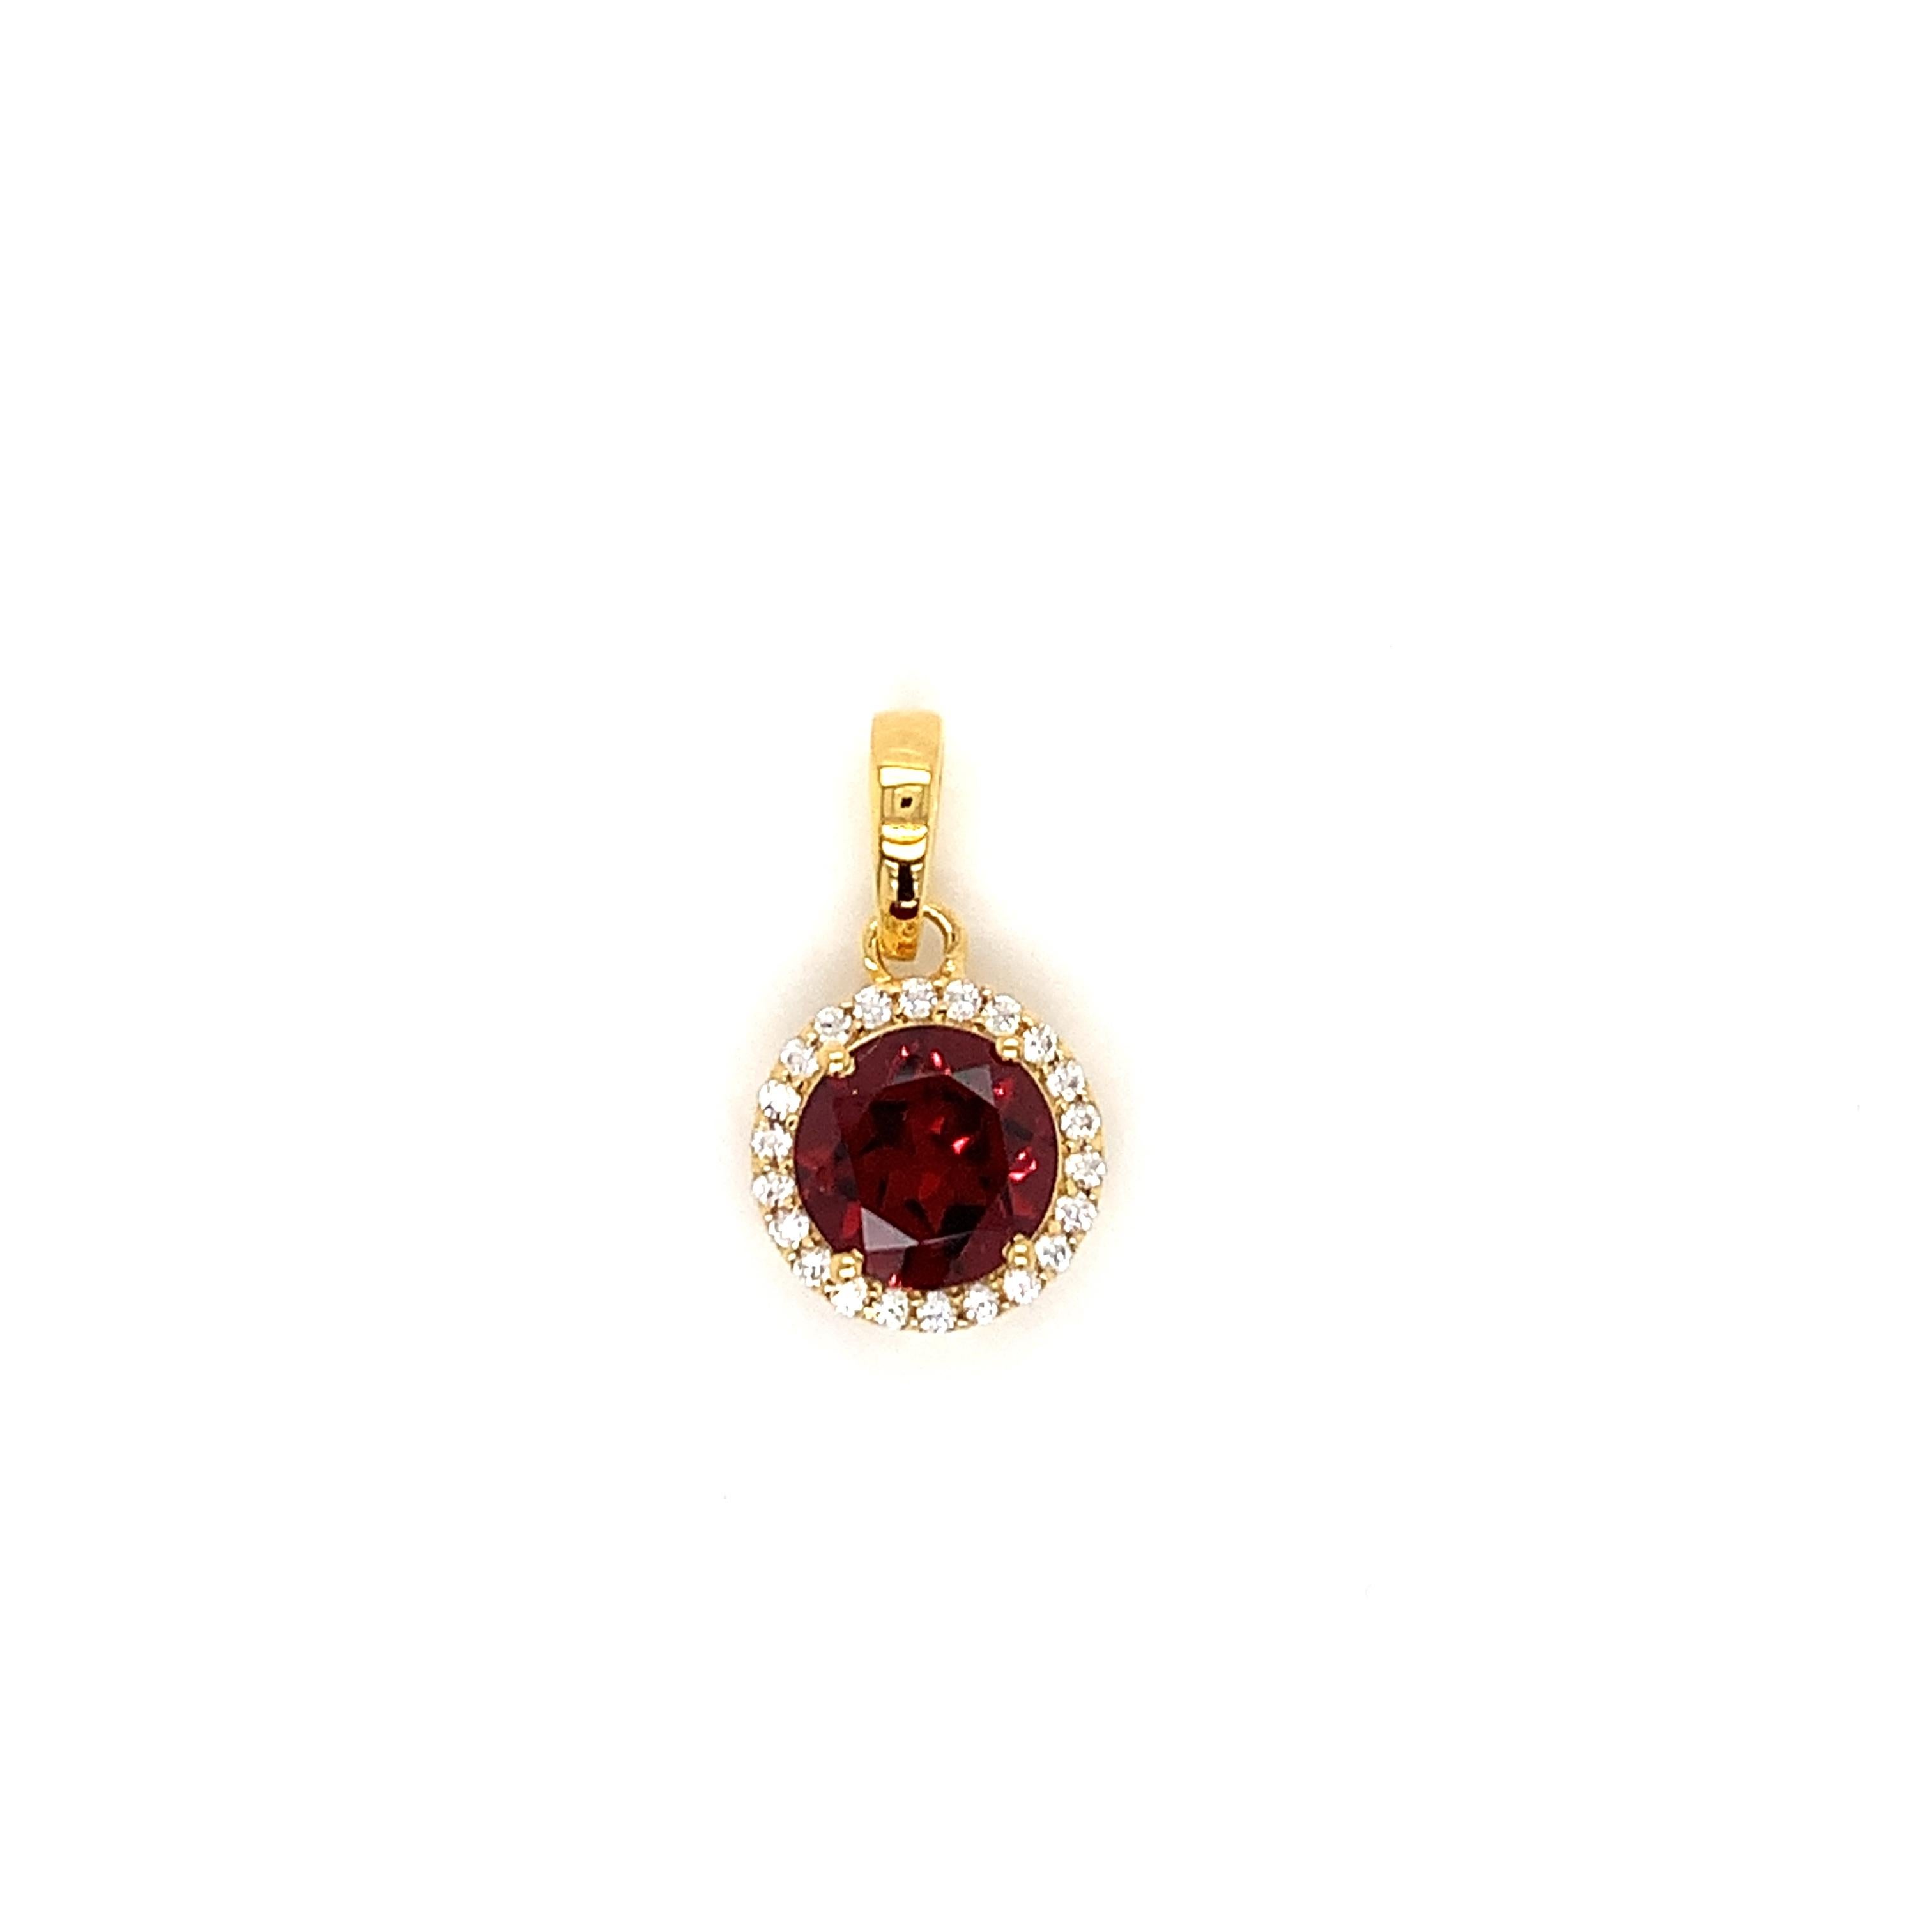 Round Shape Garnet Gemstone And CZ beautifully crafted  in a Pendant. A fiery Red Color January Birthstone. For a special occasion like Engagement or Proposal or may be as a gift for a special person.

Primary Stone Size - 8x8 mm